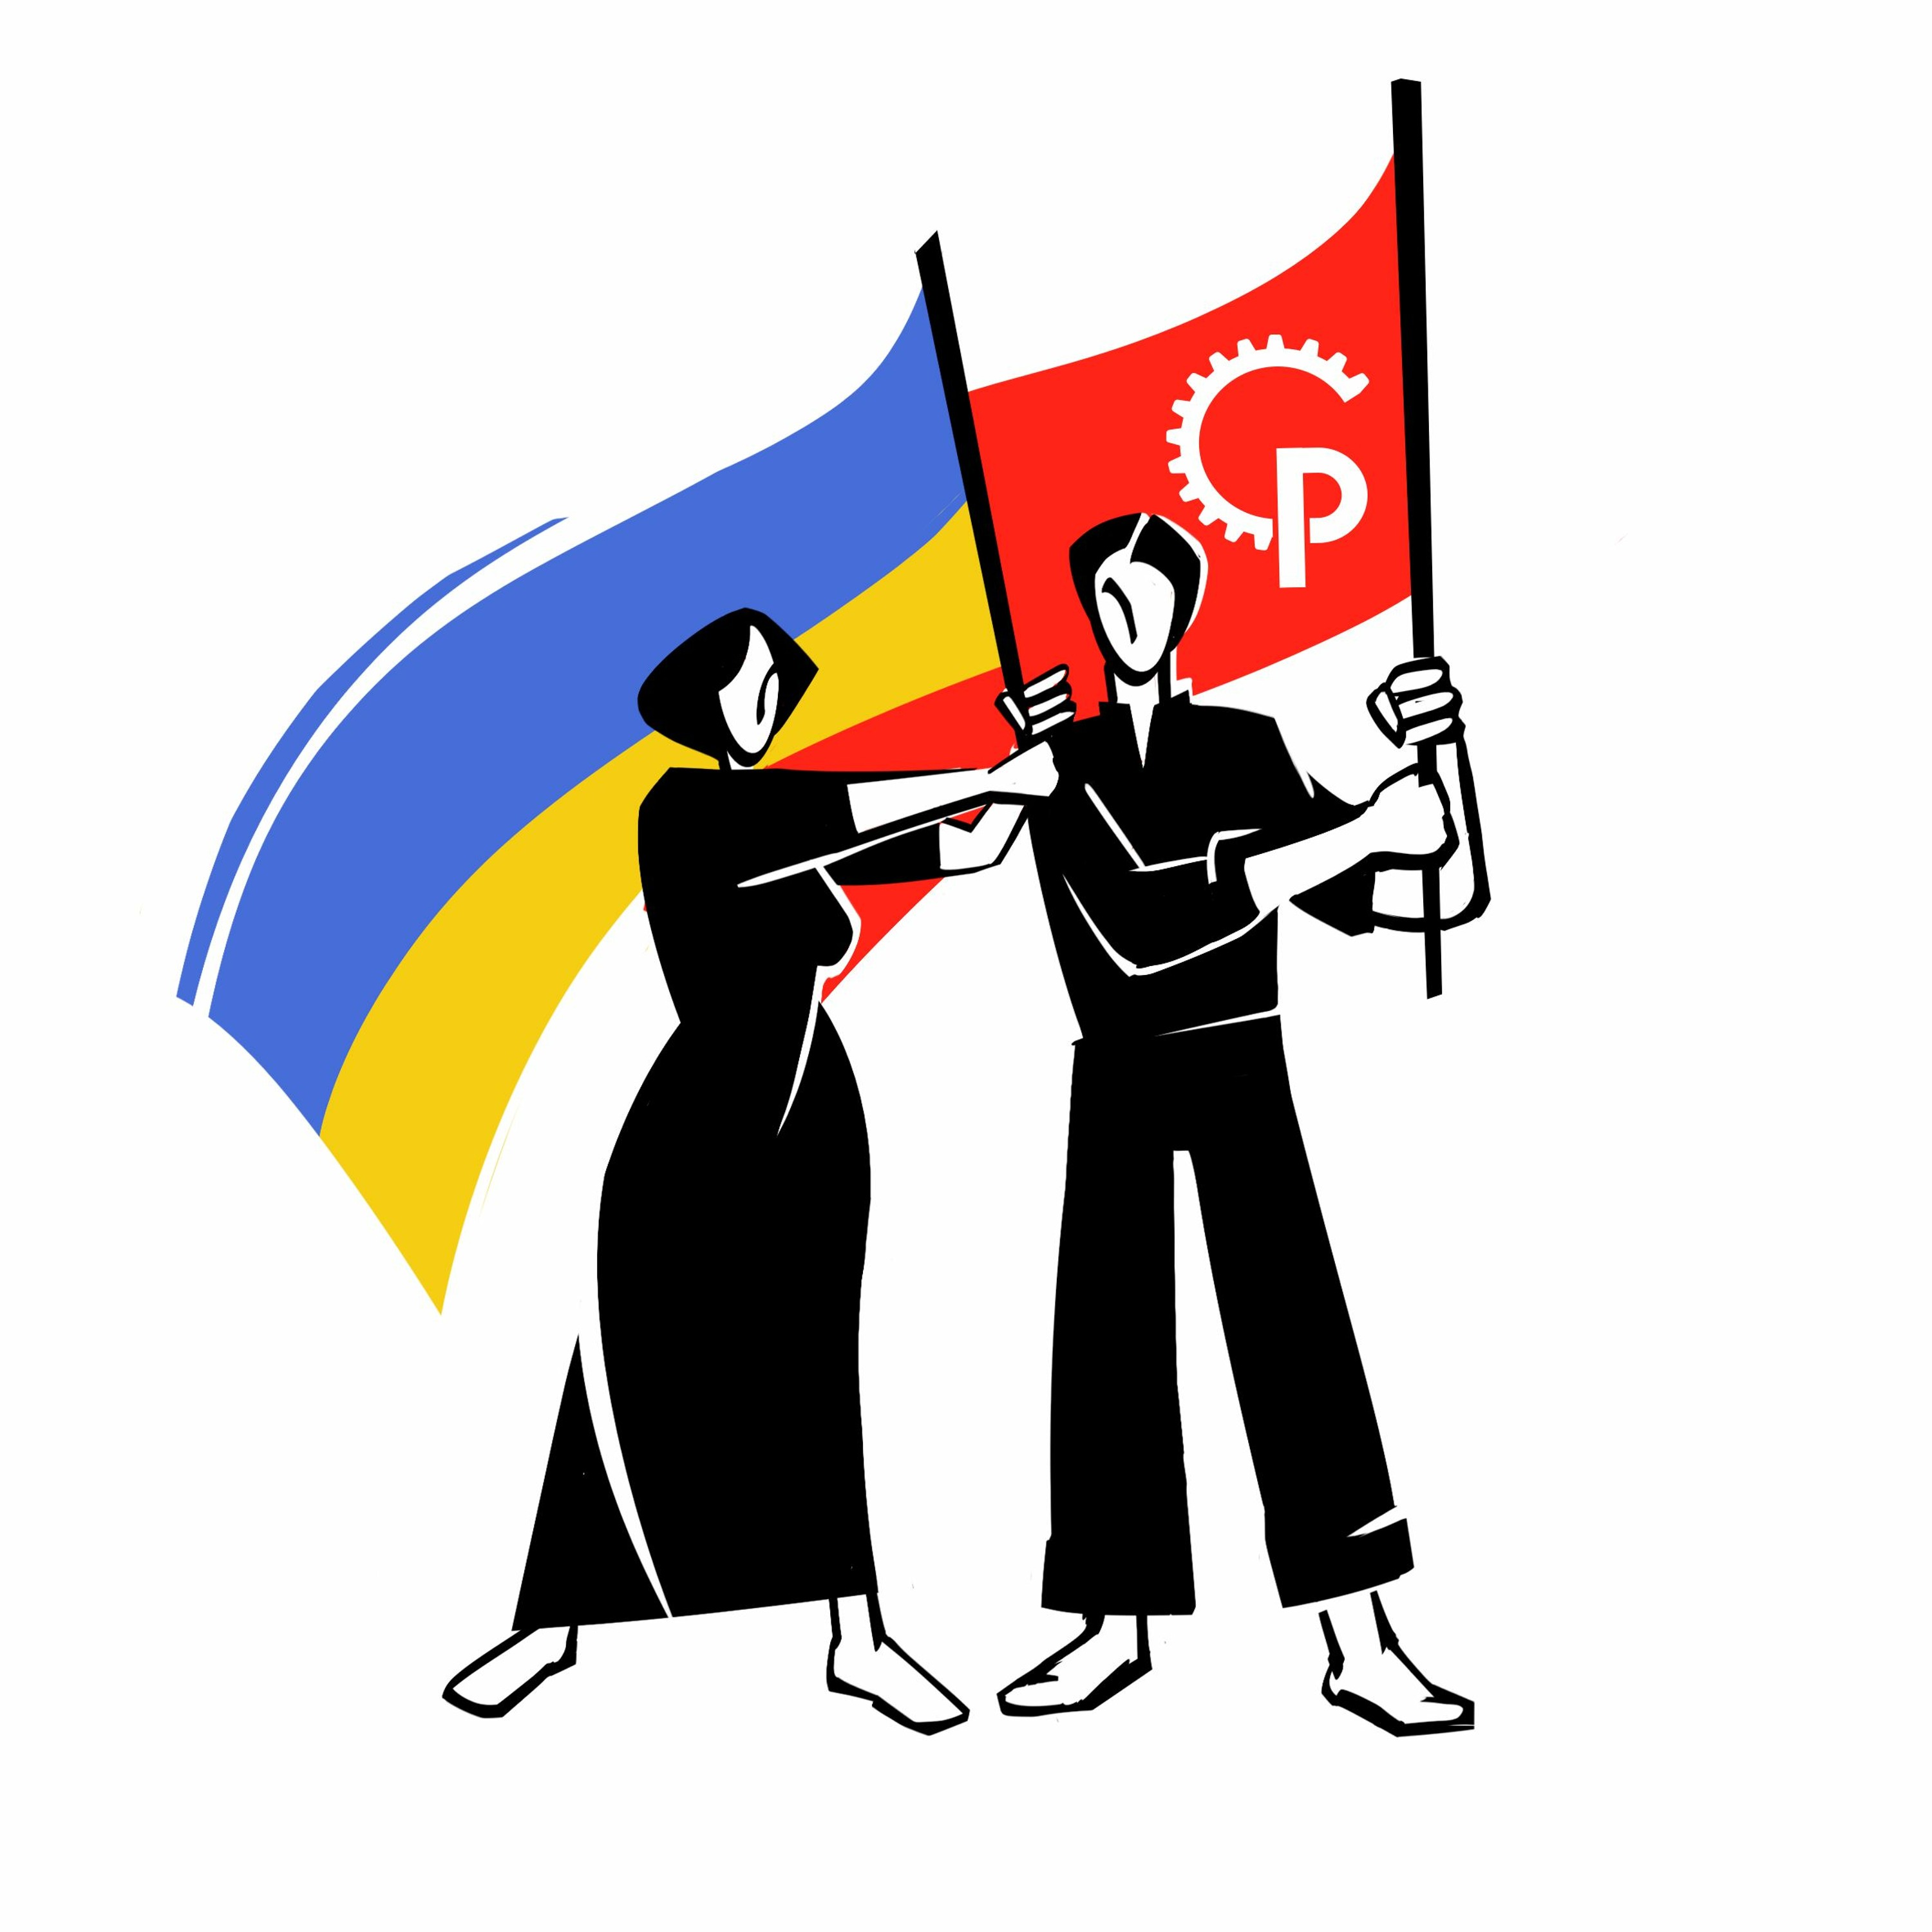 Workers’ Solidarity with Ukraine | Ideas for Freedom 2022